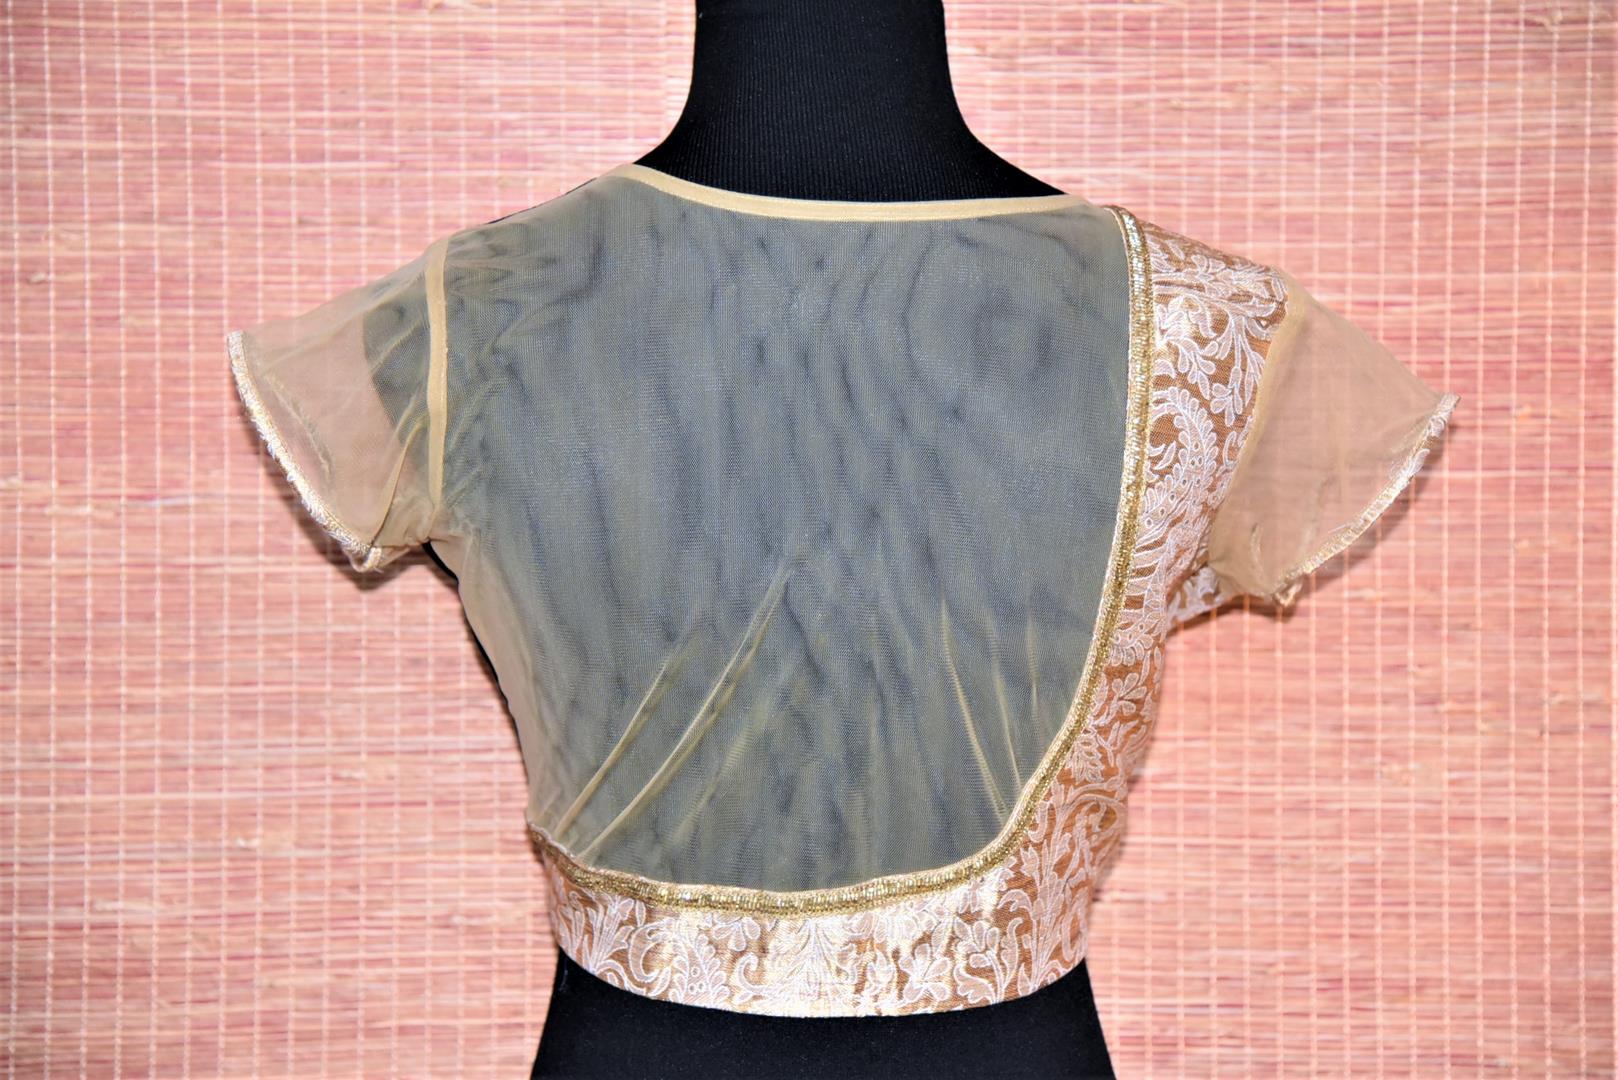 Shop black and cream Banarasi designer saree blouse online in USA. Look captivating in Indian sarees matched with exquisite readymade sari blouses from Pure Elegance Indian fashion boutique in USA.-back